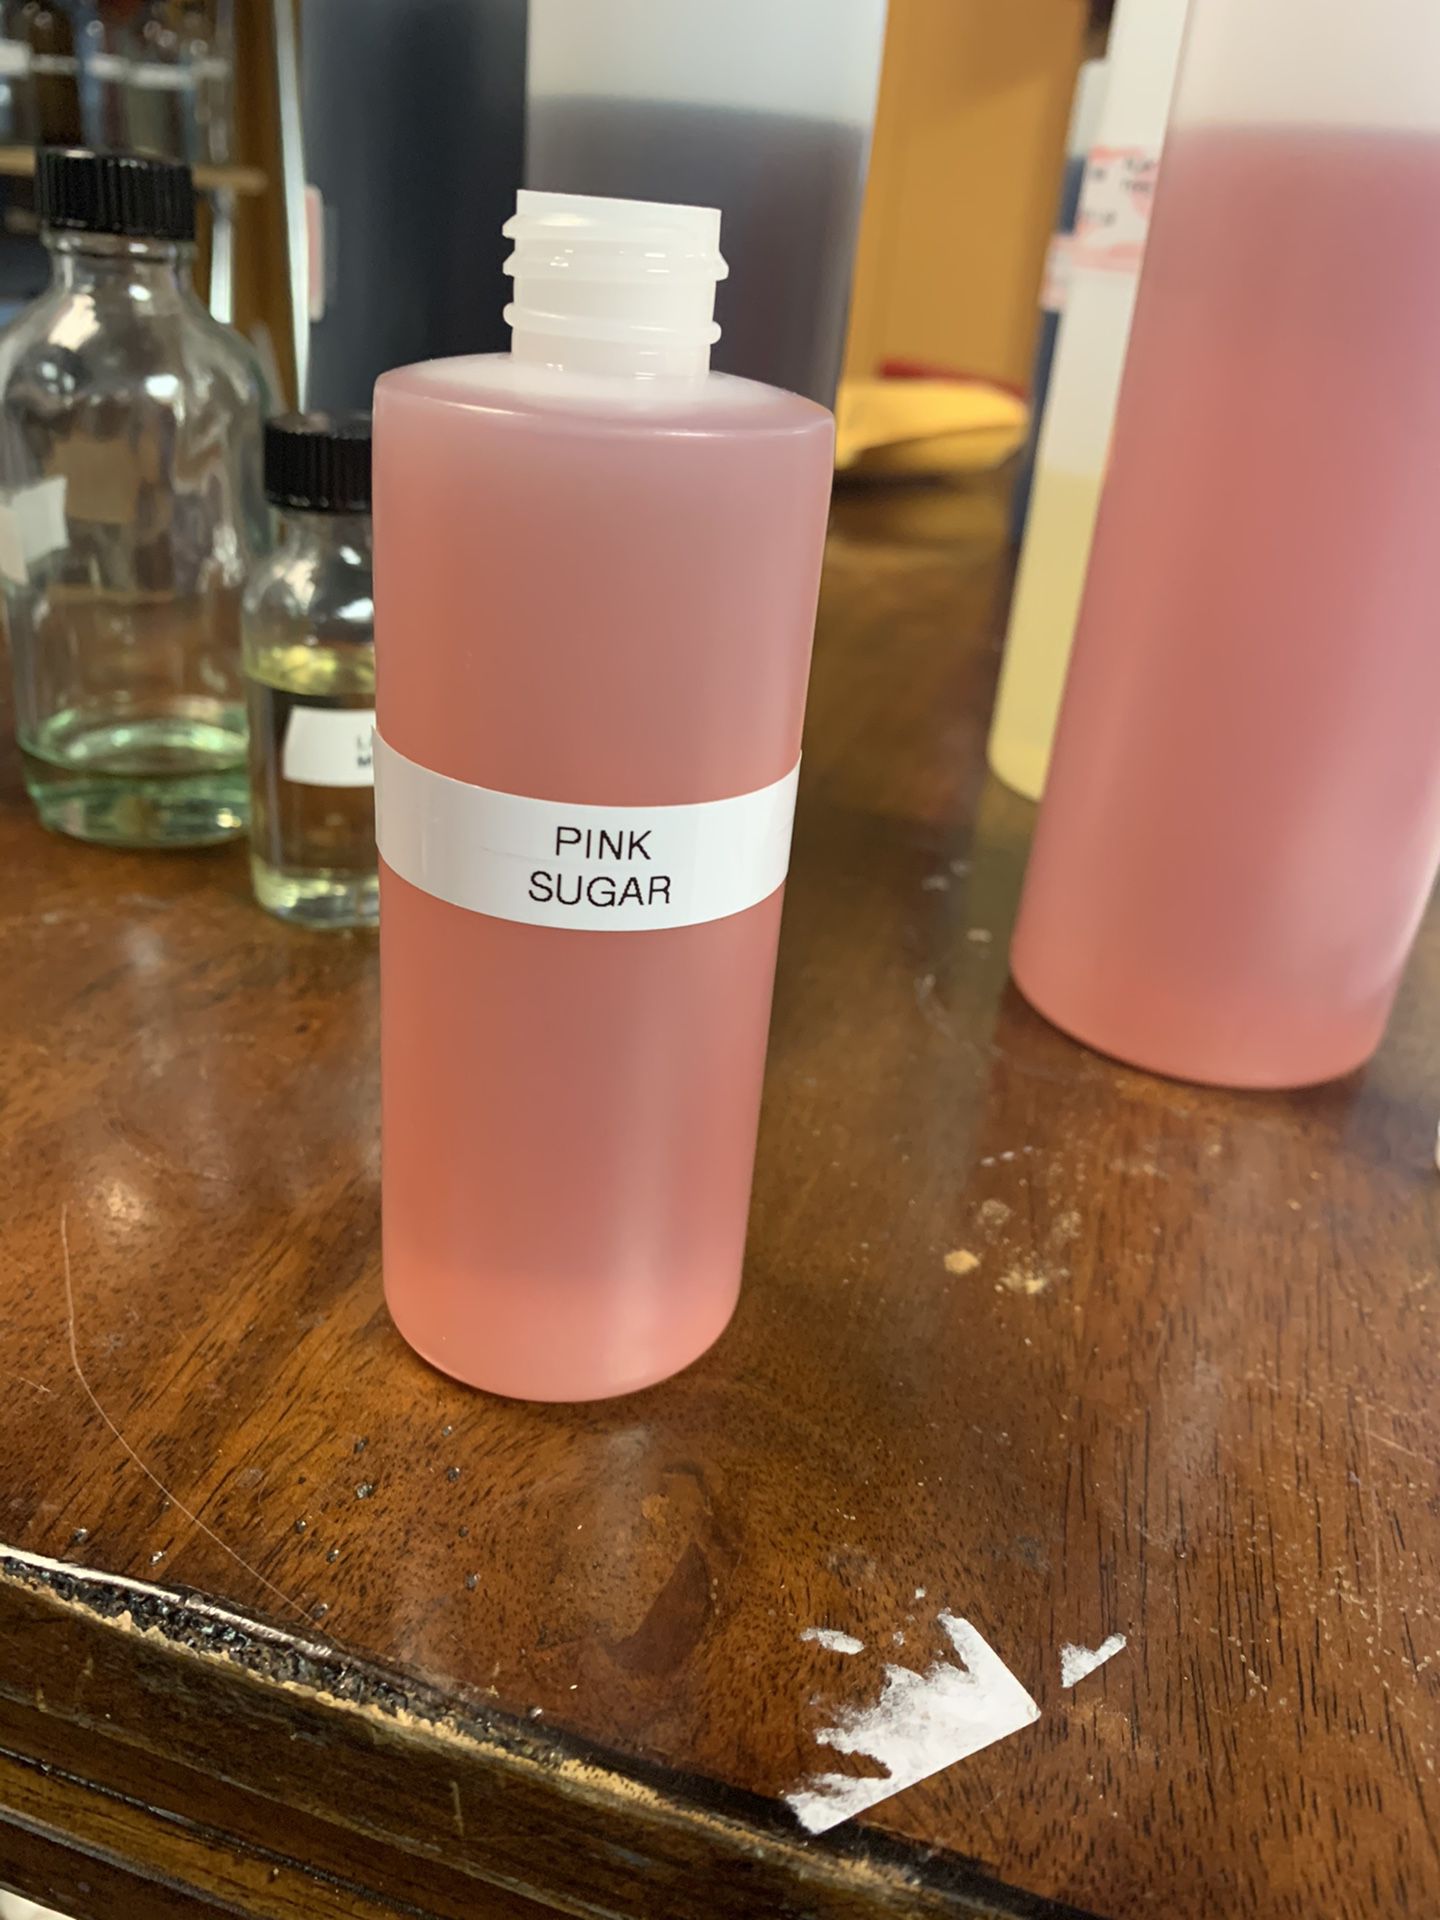 PINK SUGAR body oil fragrance 4oz for Sale in Wilkes-Barre, PA - OfferUp